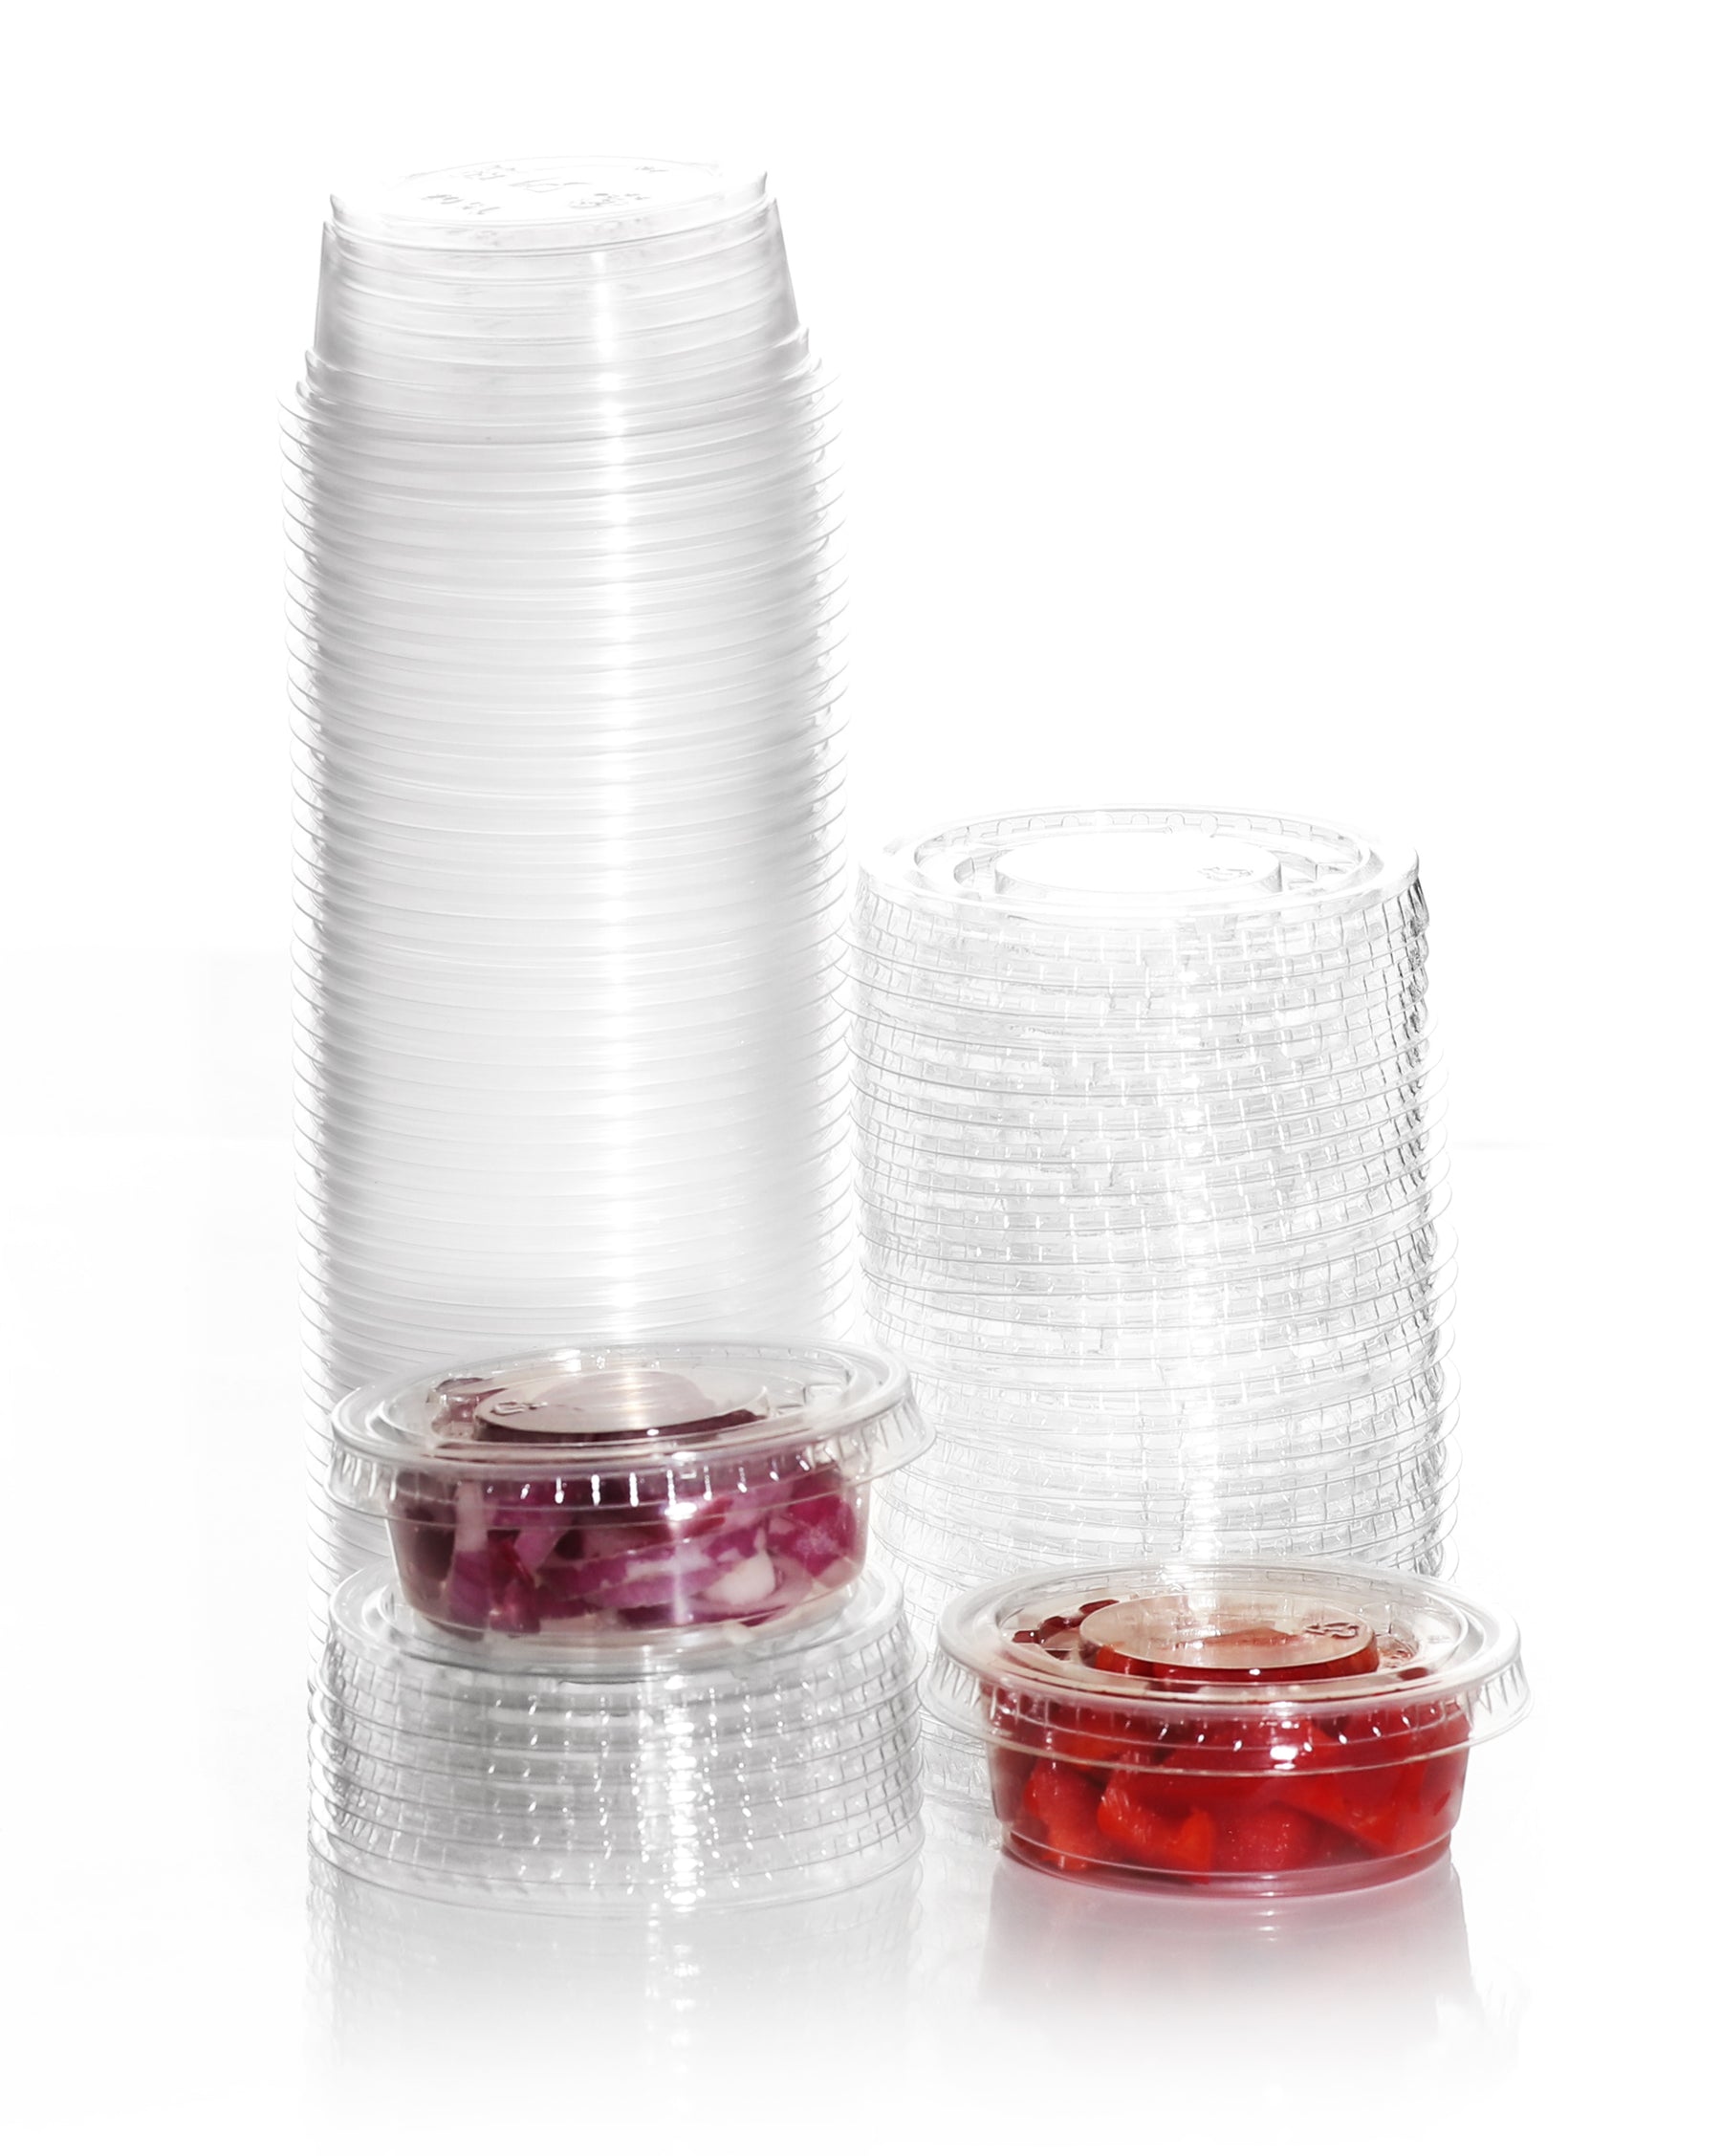 Rubbermaid Container + Lid, Glass, 1.5 Cup